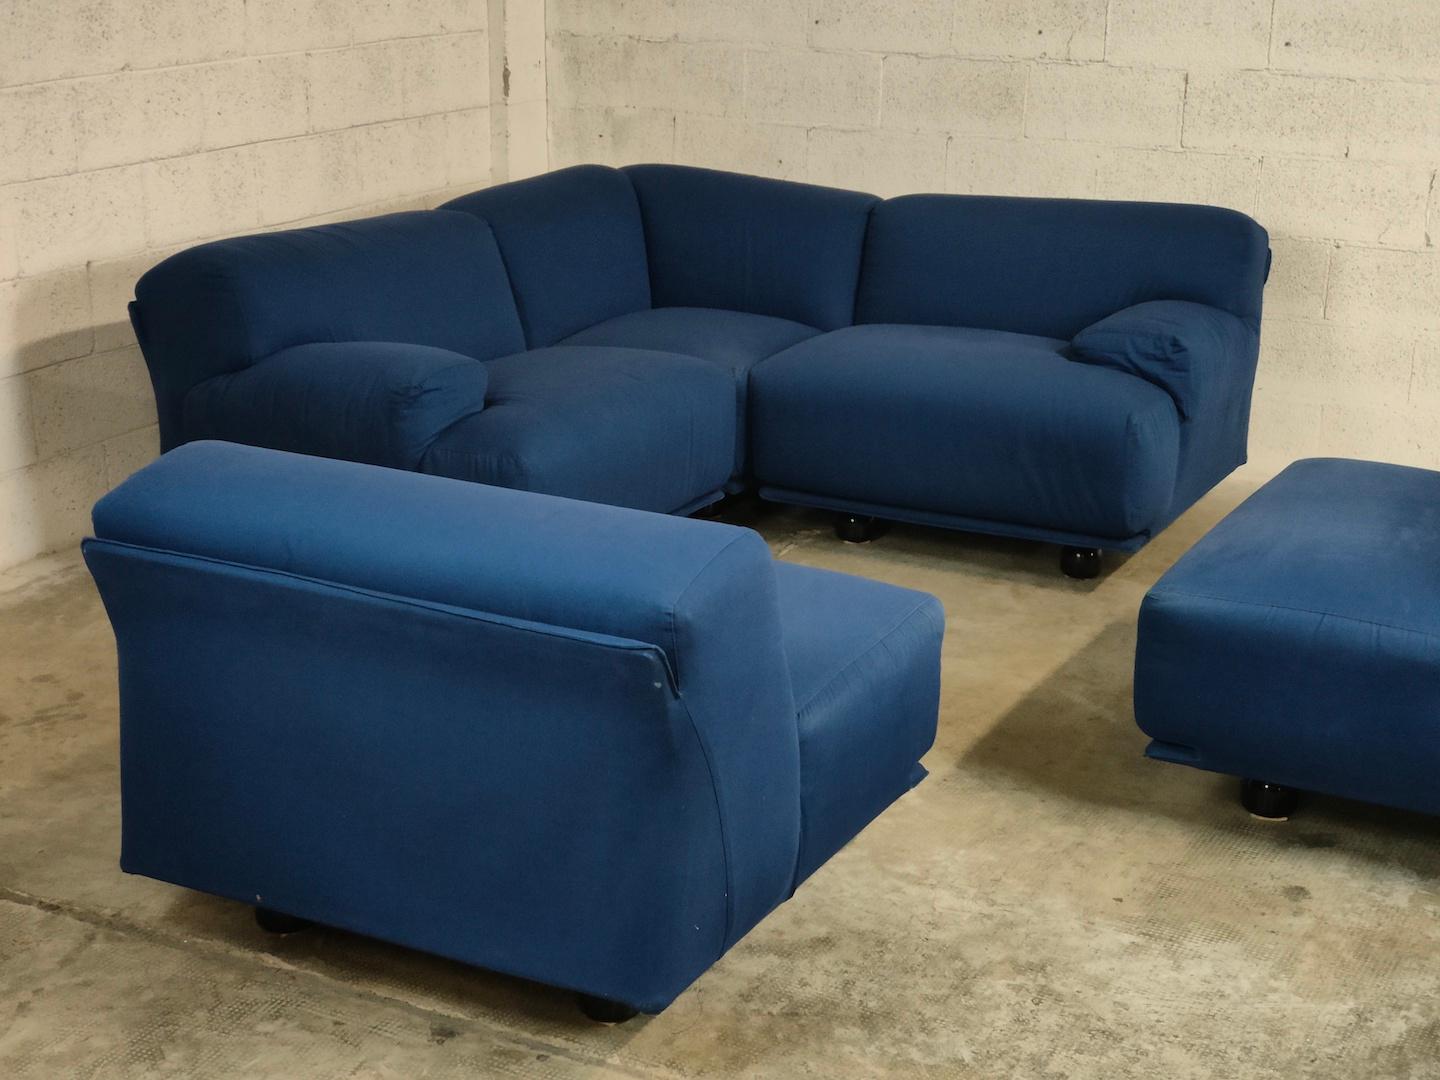 Fiandra modular sofa by Vico Magistretti for Cassina 70s

Fiandra is a project by Vico Magistretti put into production by Cassina in 1975, seating elements with simple lines and whose name evokes the 